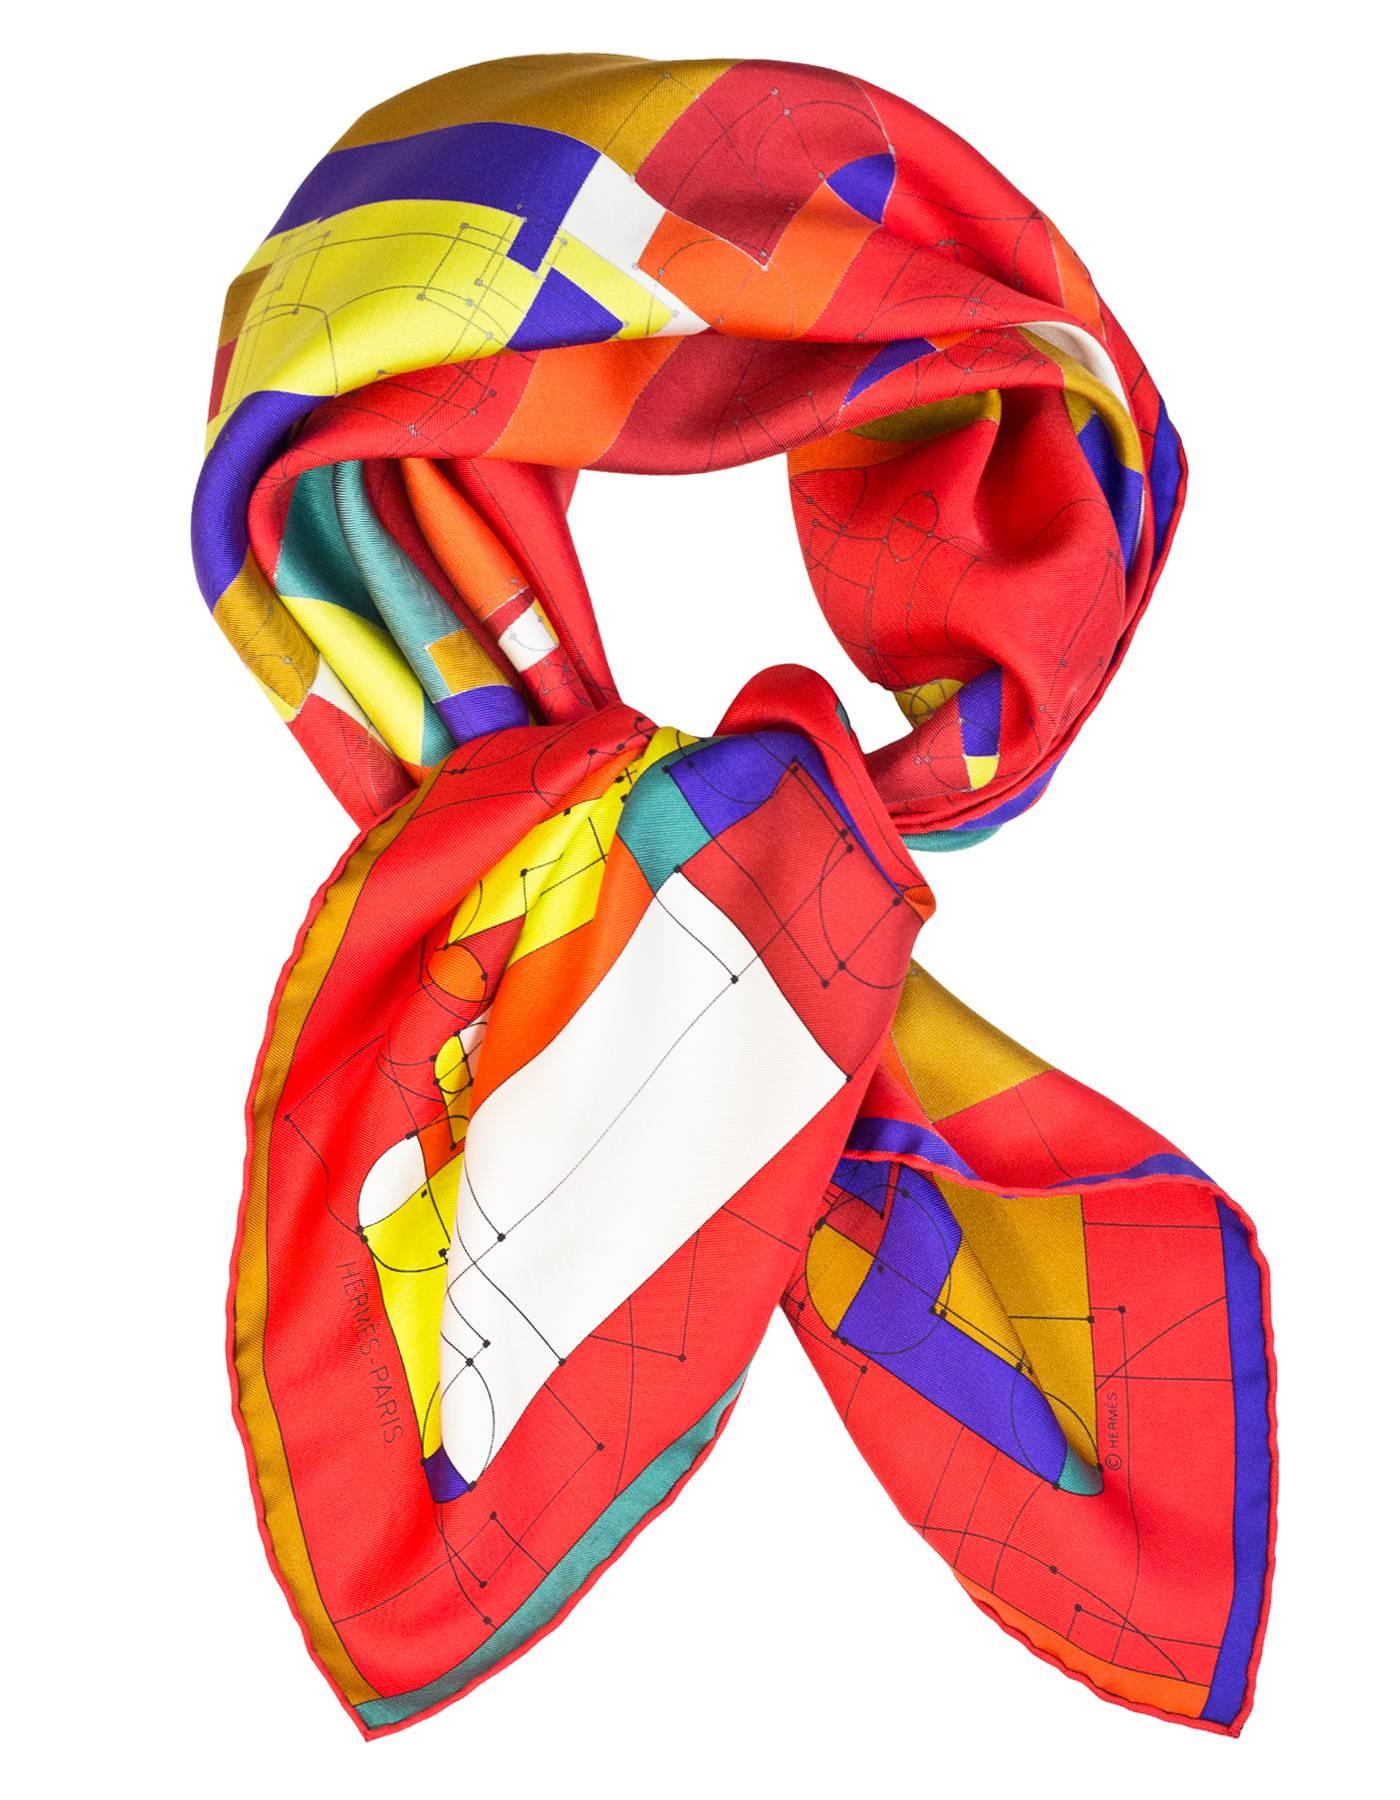 Hermes Echec Au Roi Silk 90cm Scarf designed by Benoît-Pierre Emery 

Made In: France
Color: Red
Composition: 100% Silk
Retail Price: $415 + tax
Overall Condition: Excellent pre-owned condition with the exception of small